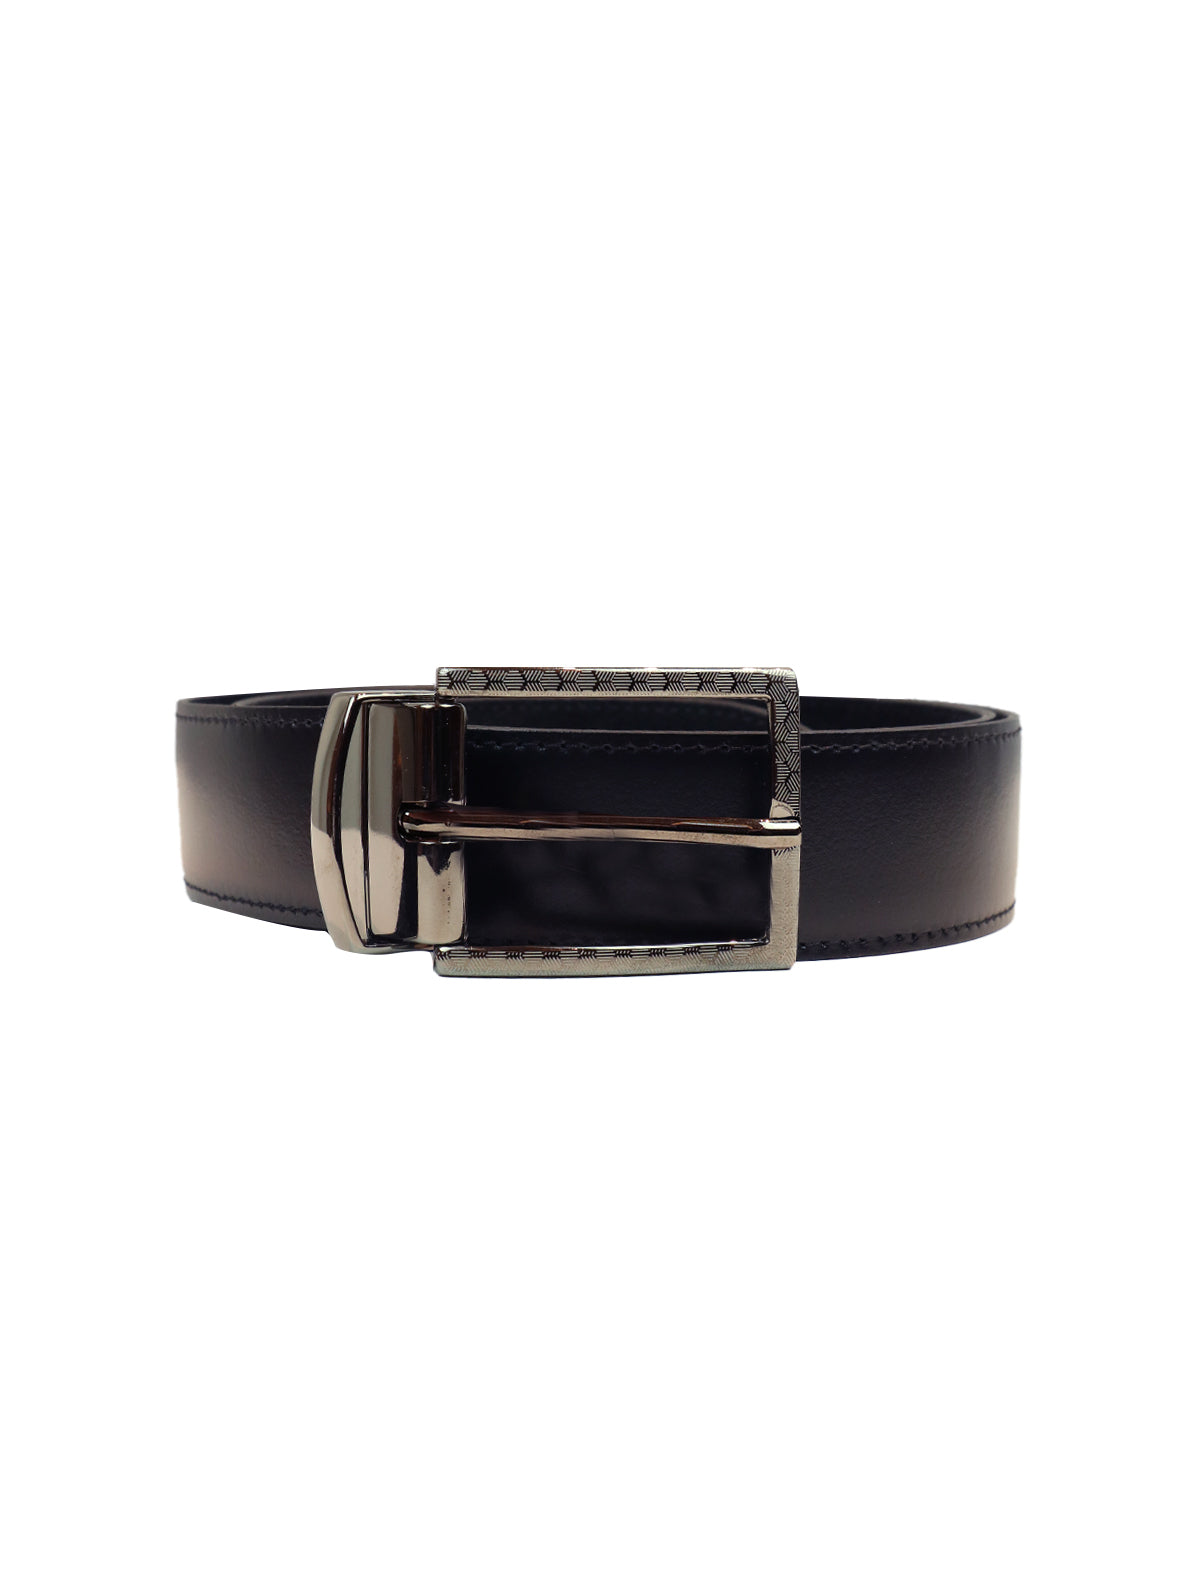 Andrea d'Amico Reversible Suede Leather Belt in Black